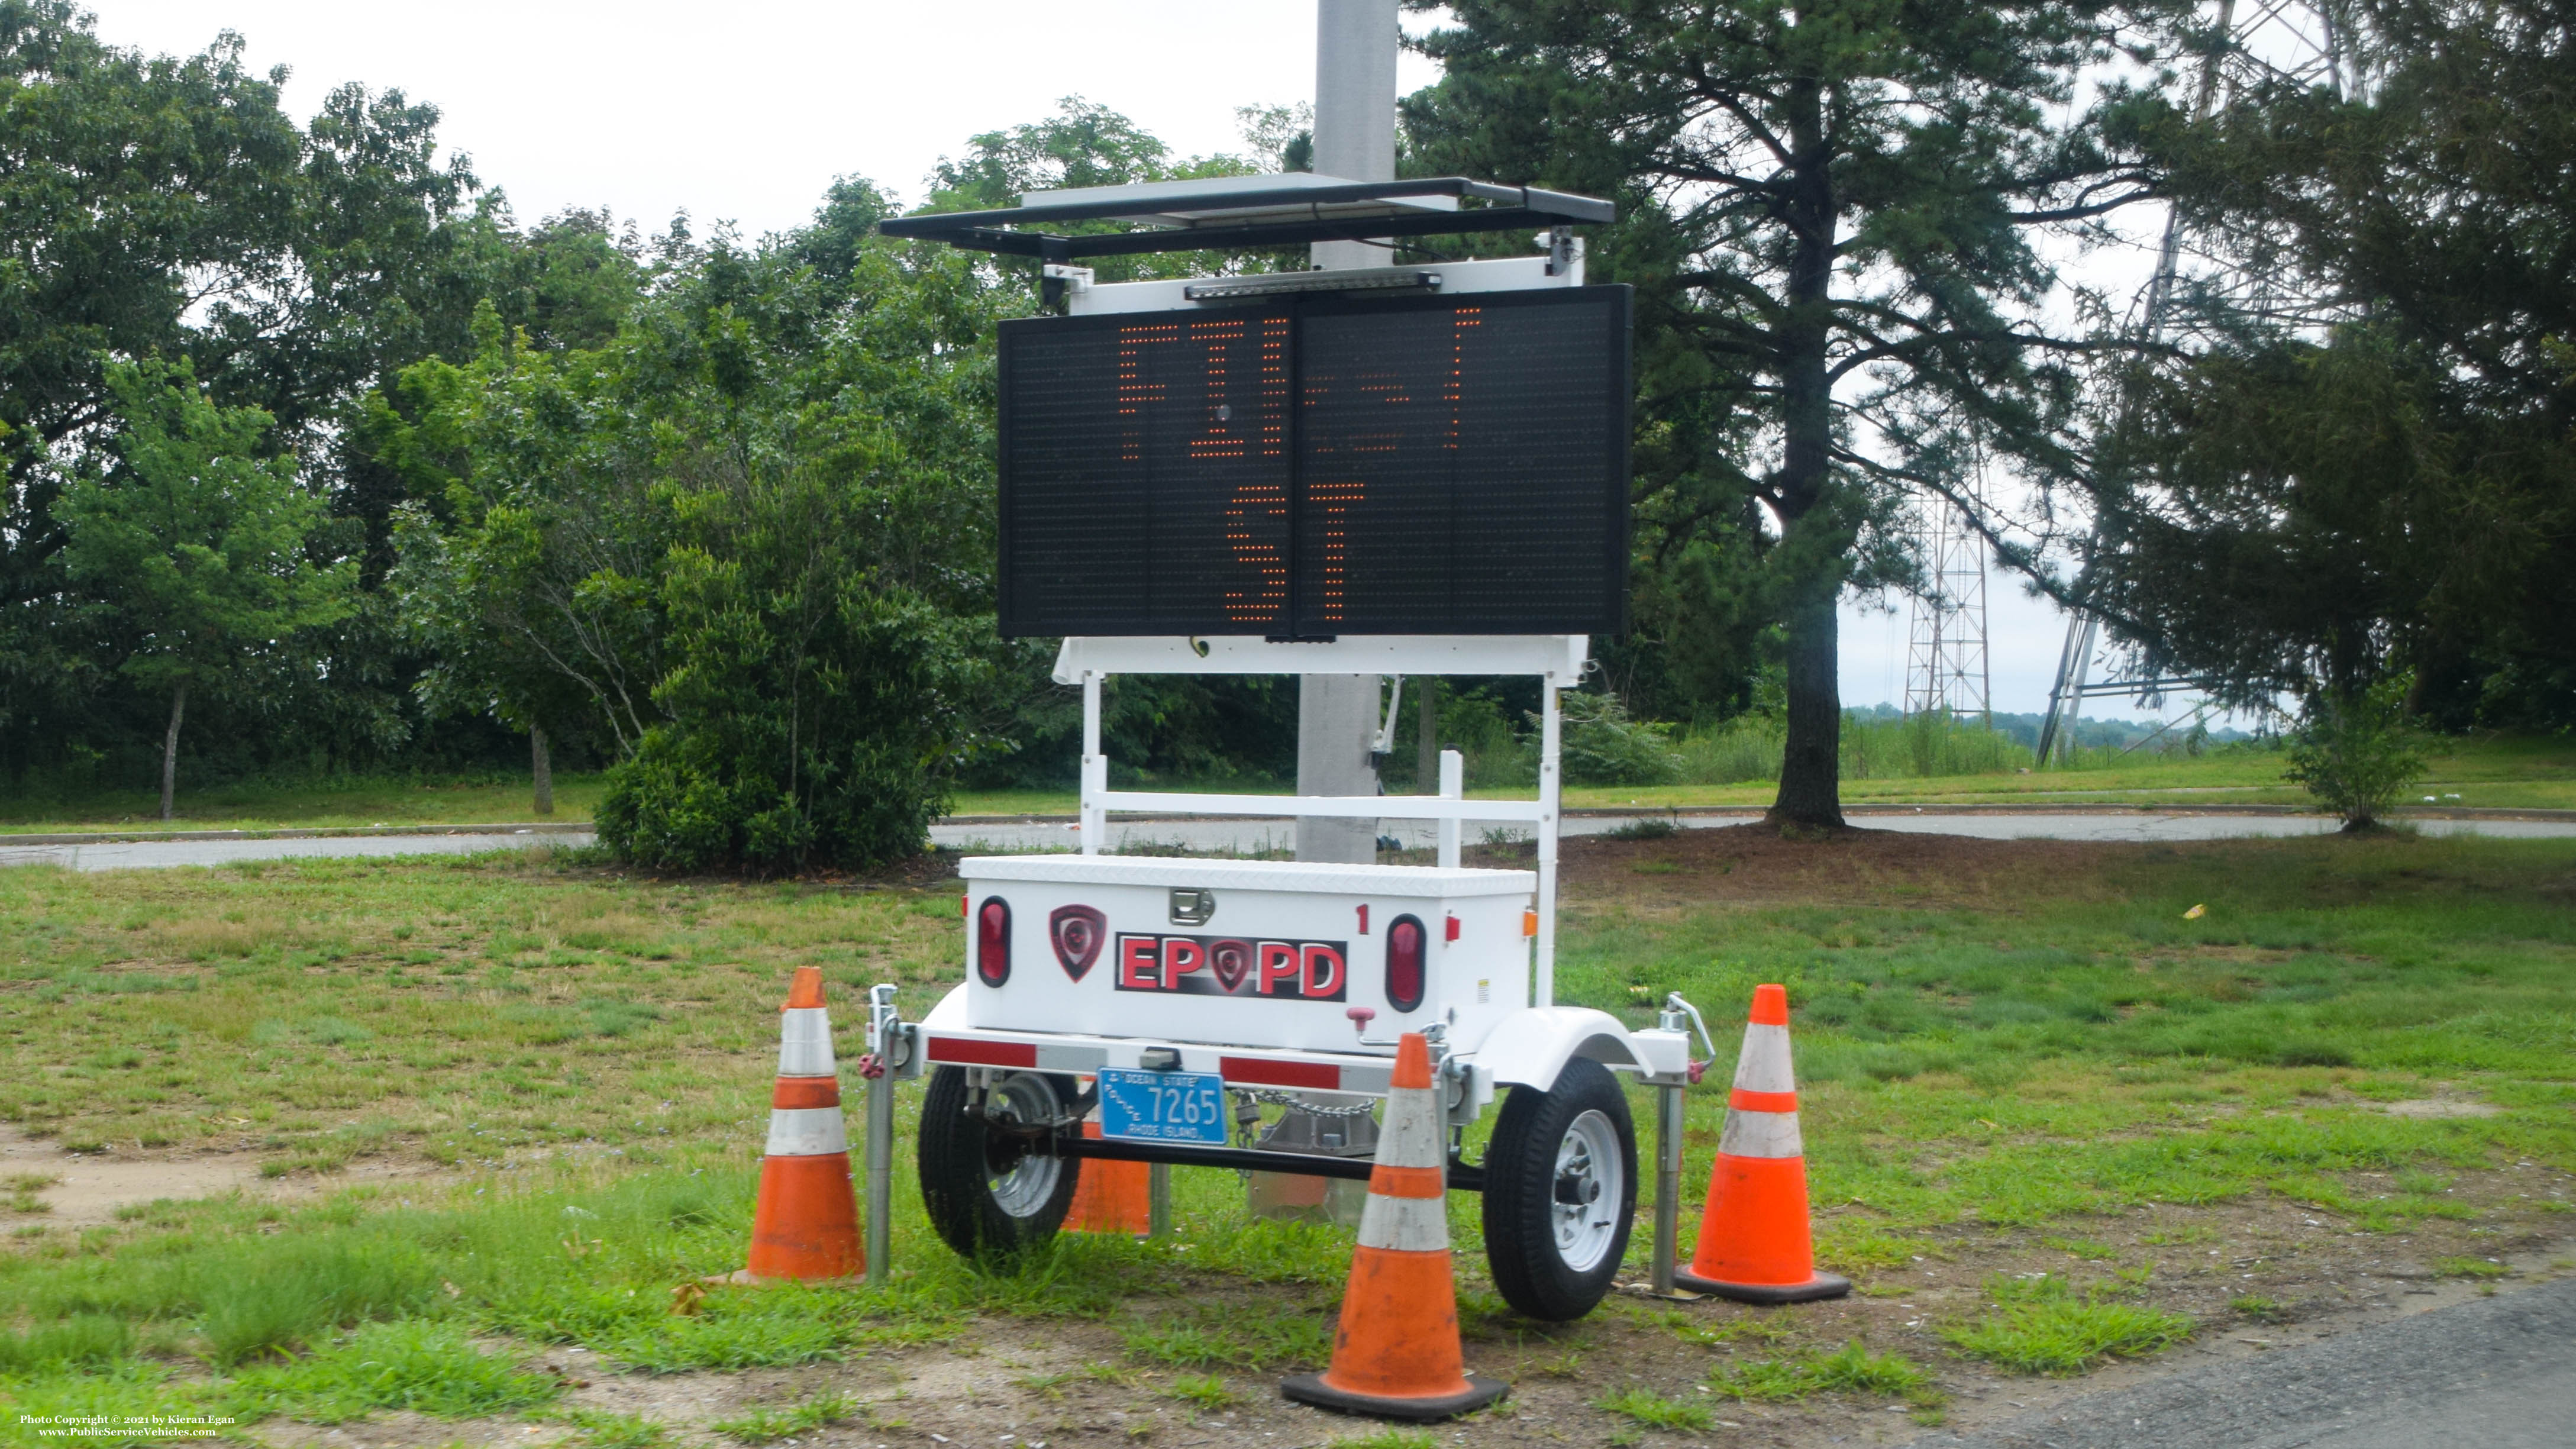 A photo  of East Providence Police
            Message Trailer, a 2006-2021 All Traffic Solutions Variable Message Sign             taken by Kieran Egan